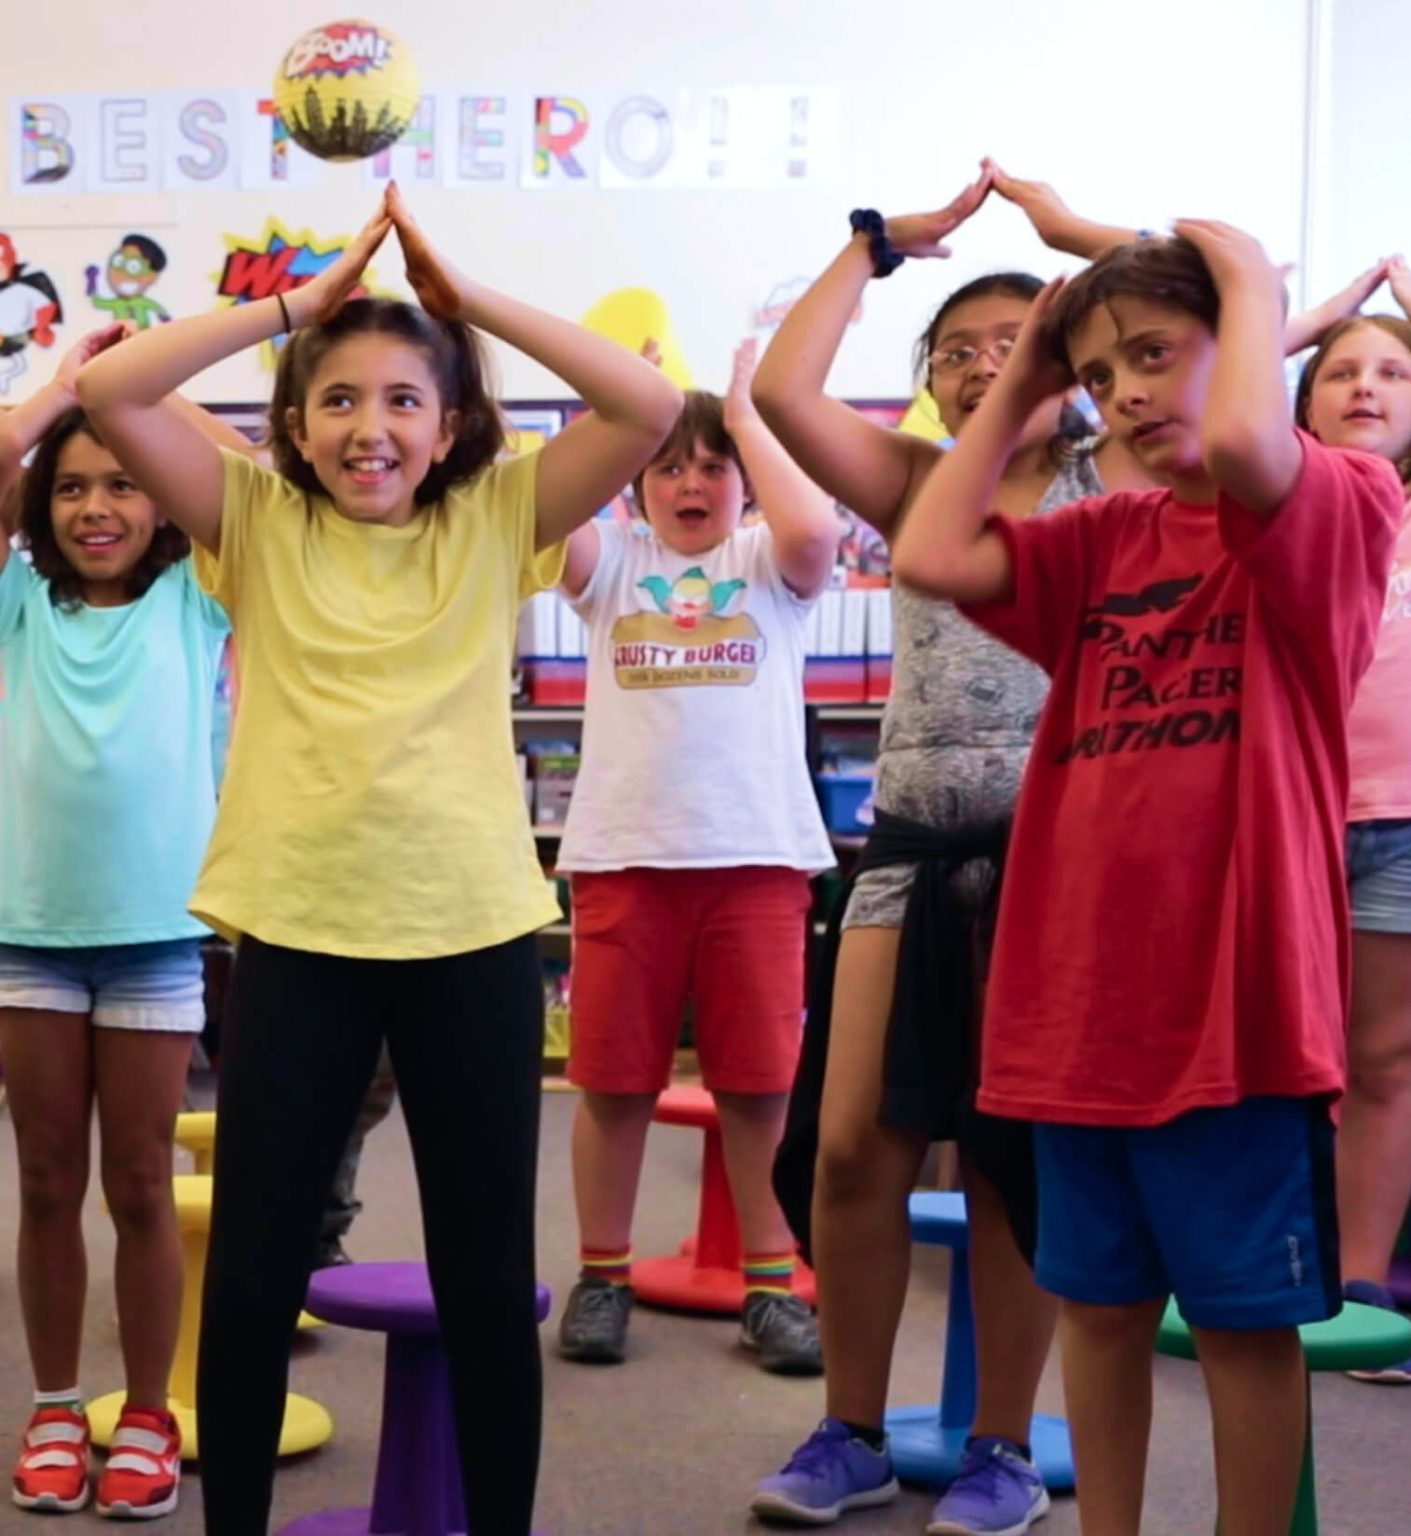 A group of kids in a classroom raise their arms over their heads and bring their hands together in a point.